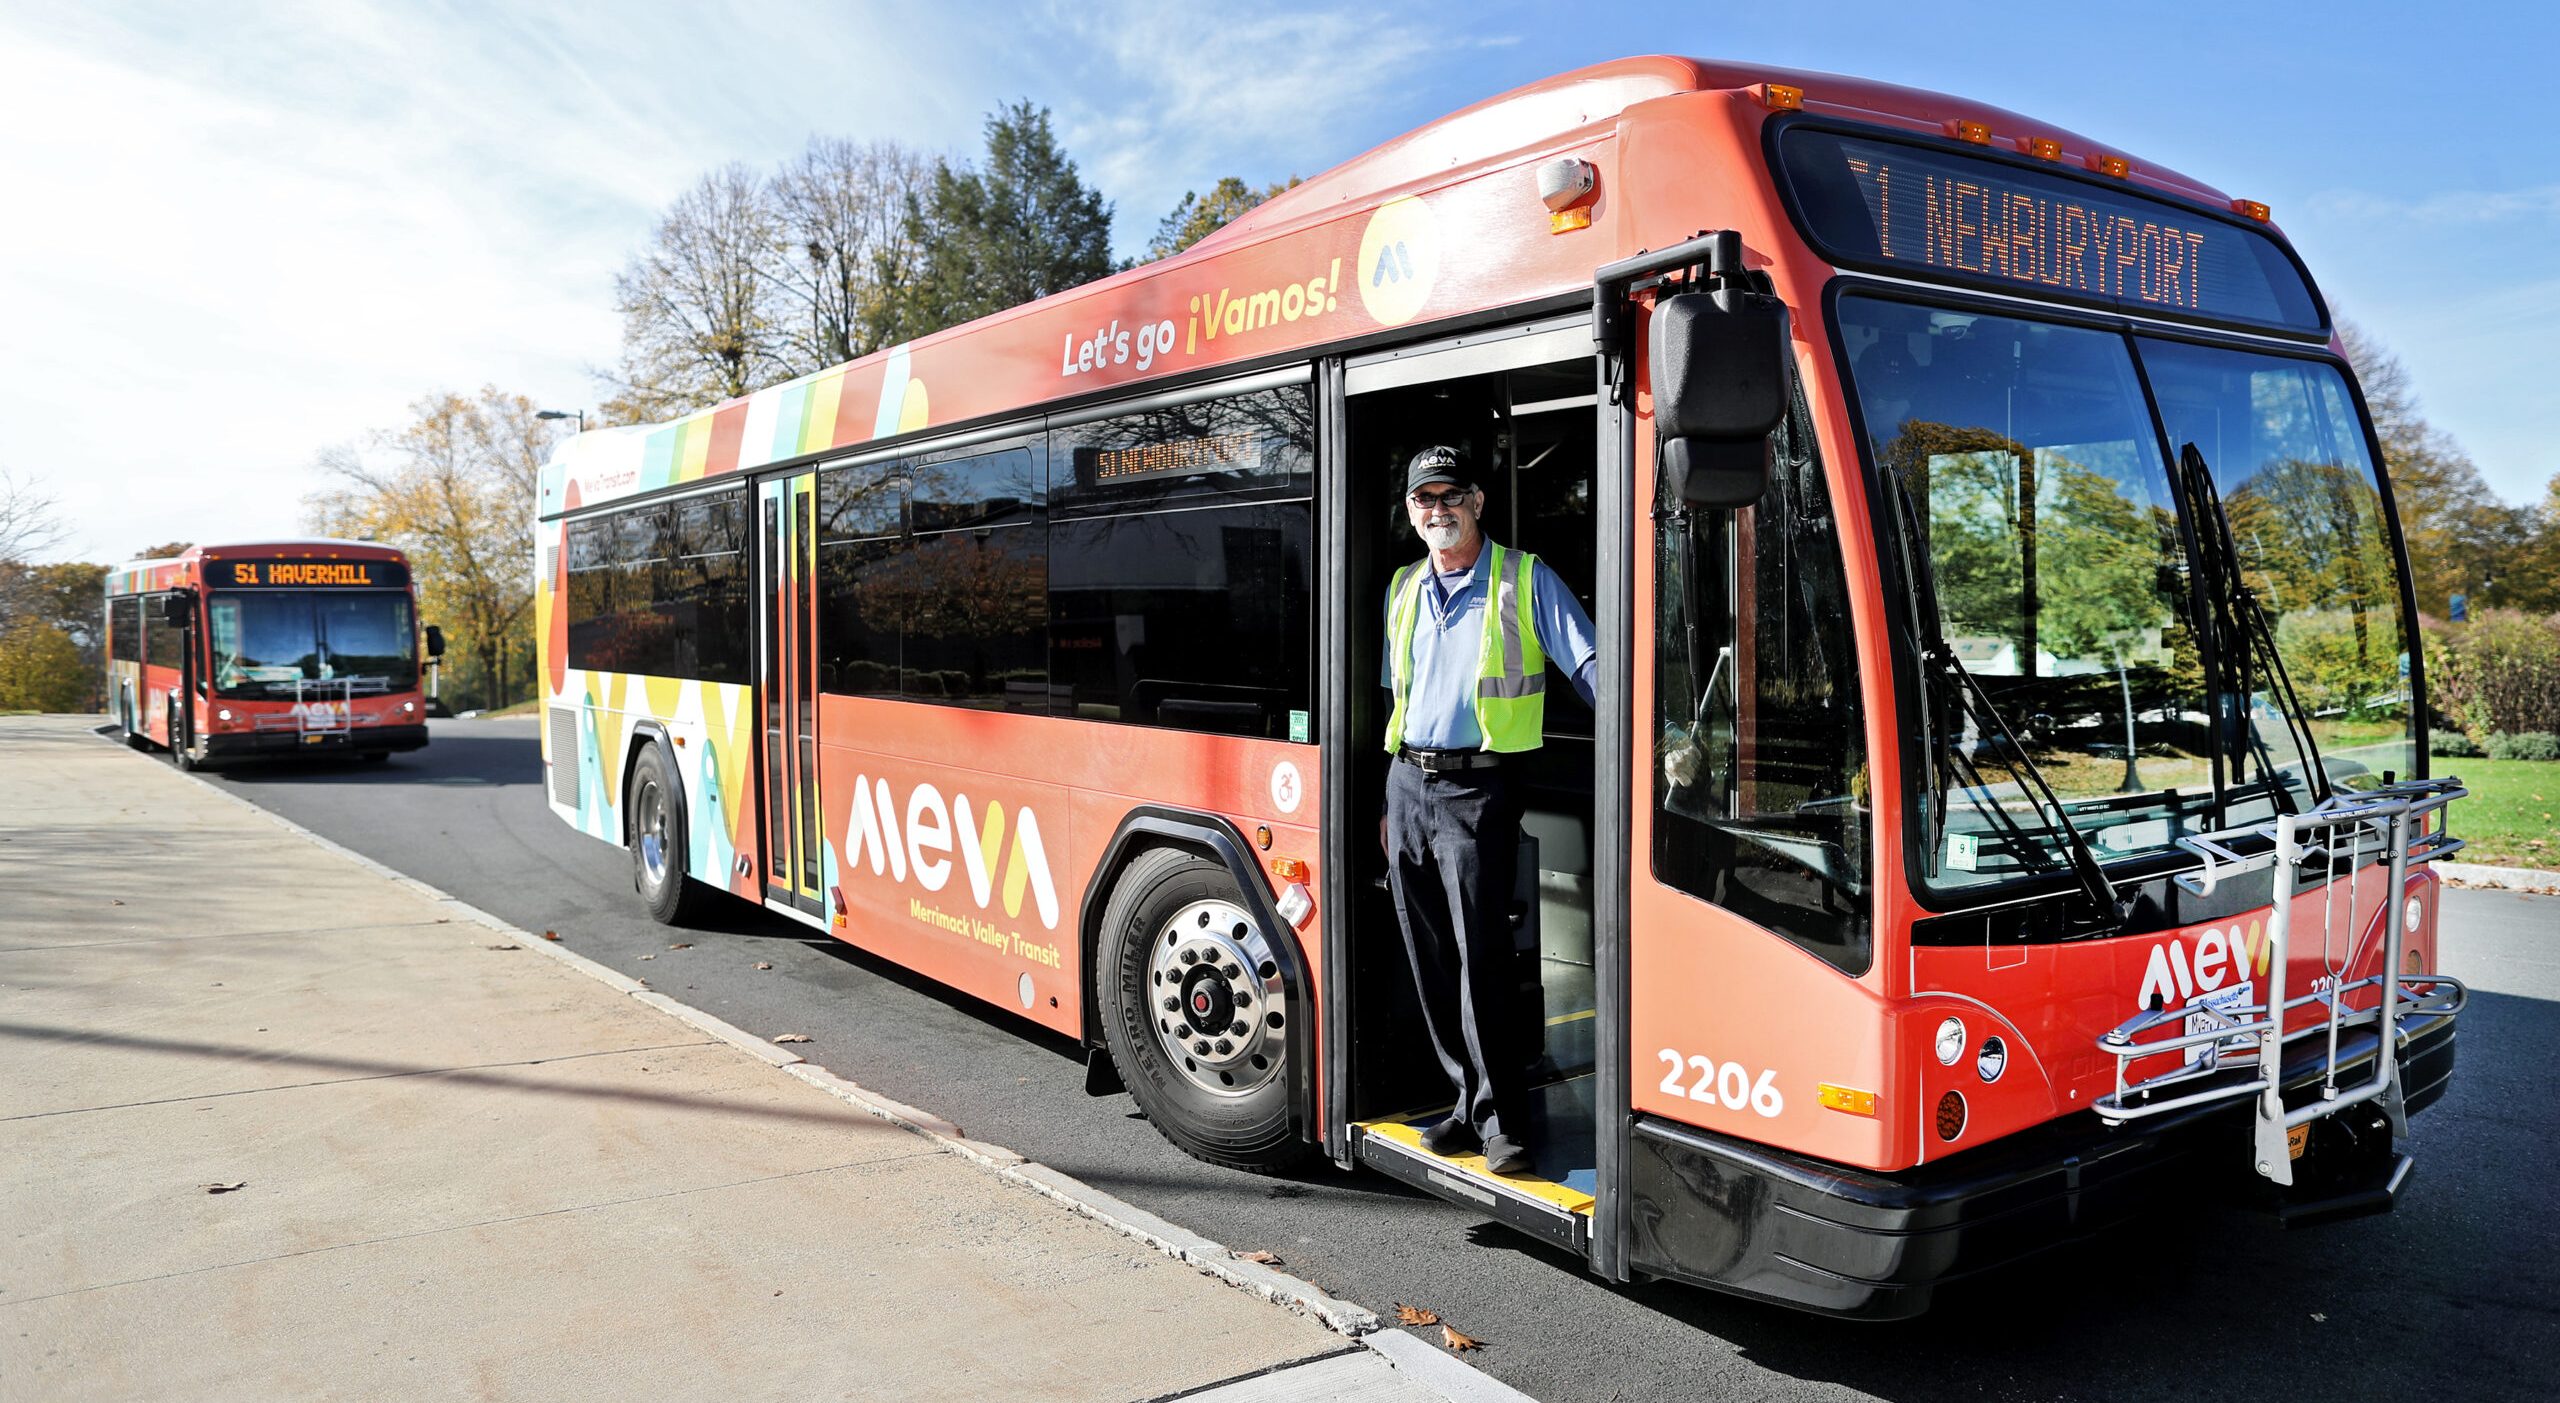 A driver with a white beard wearing a green vest and a black baseball cap stands in the door of a red city bus with the MeVa logo on its side. The destination sign on the front of the bus says "61- Newburyport" and a second bus waits behind in the background at left.